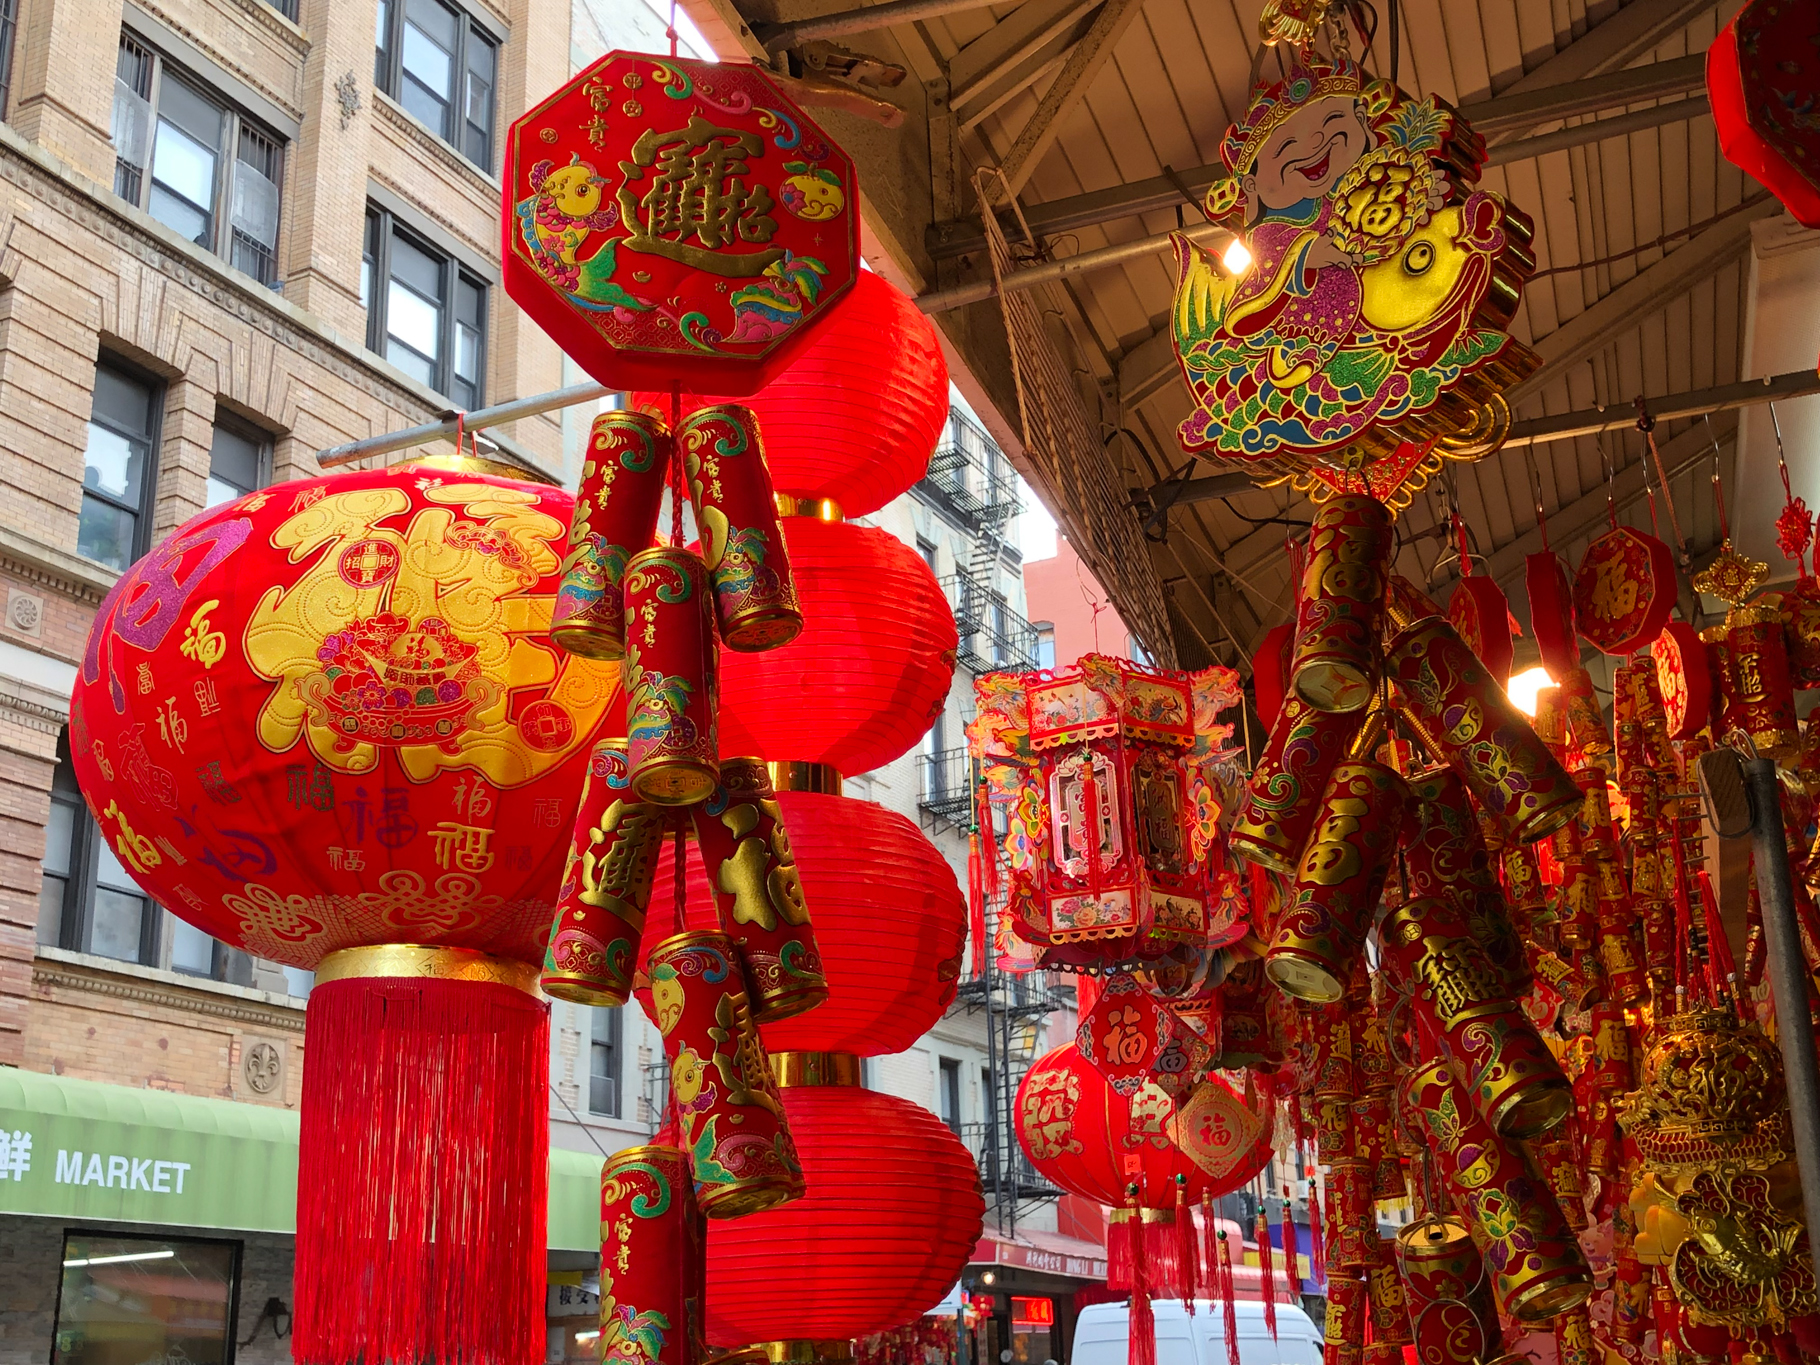 Red lanterns swaying in the wind tell that New Years is coming.